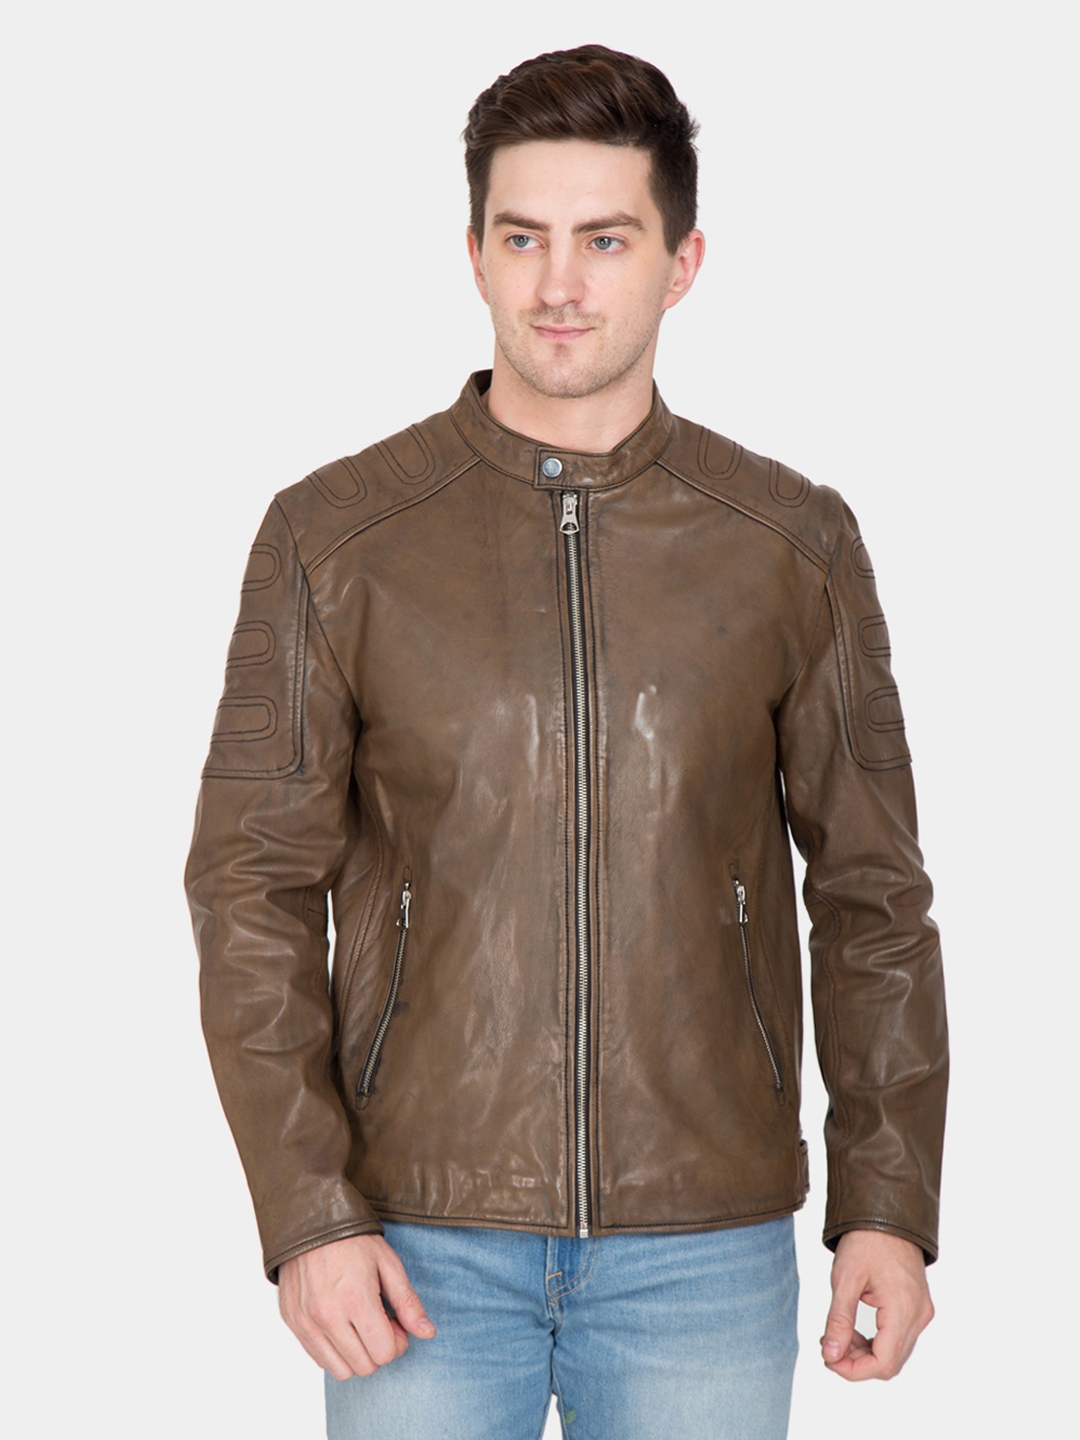 Justanned | JUSTANNED CAROB TAN LEATHER JACKET 0